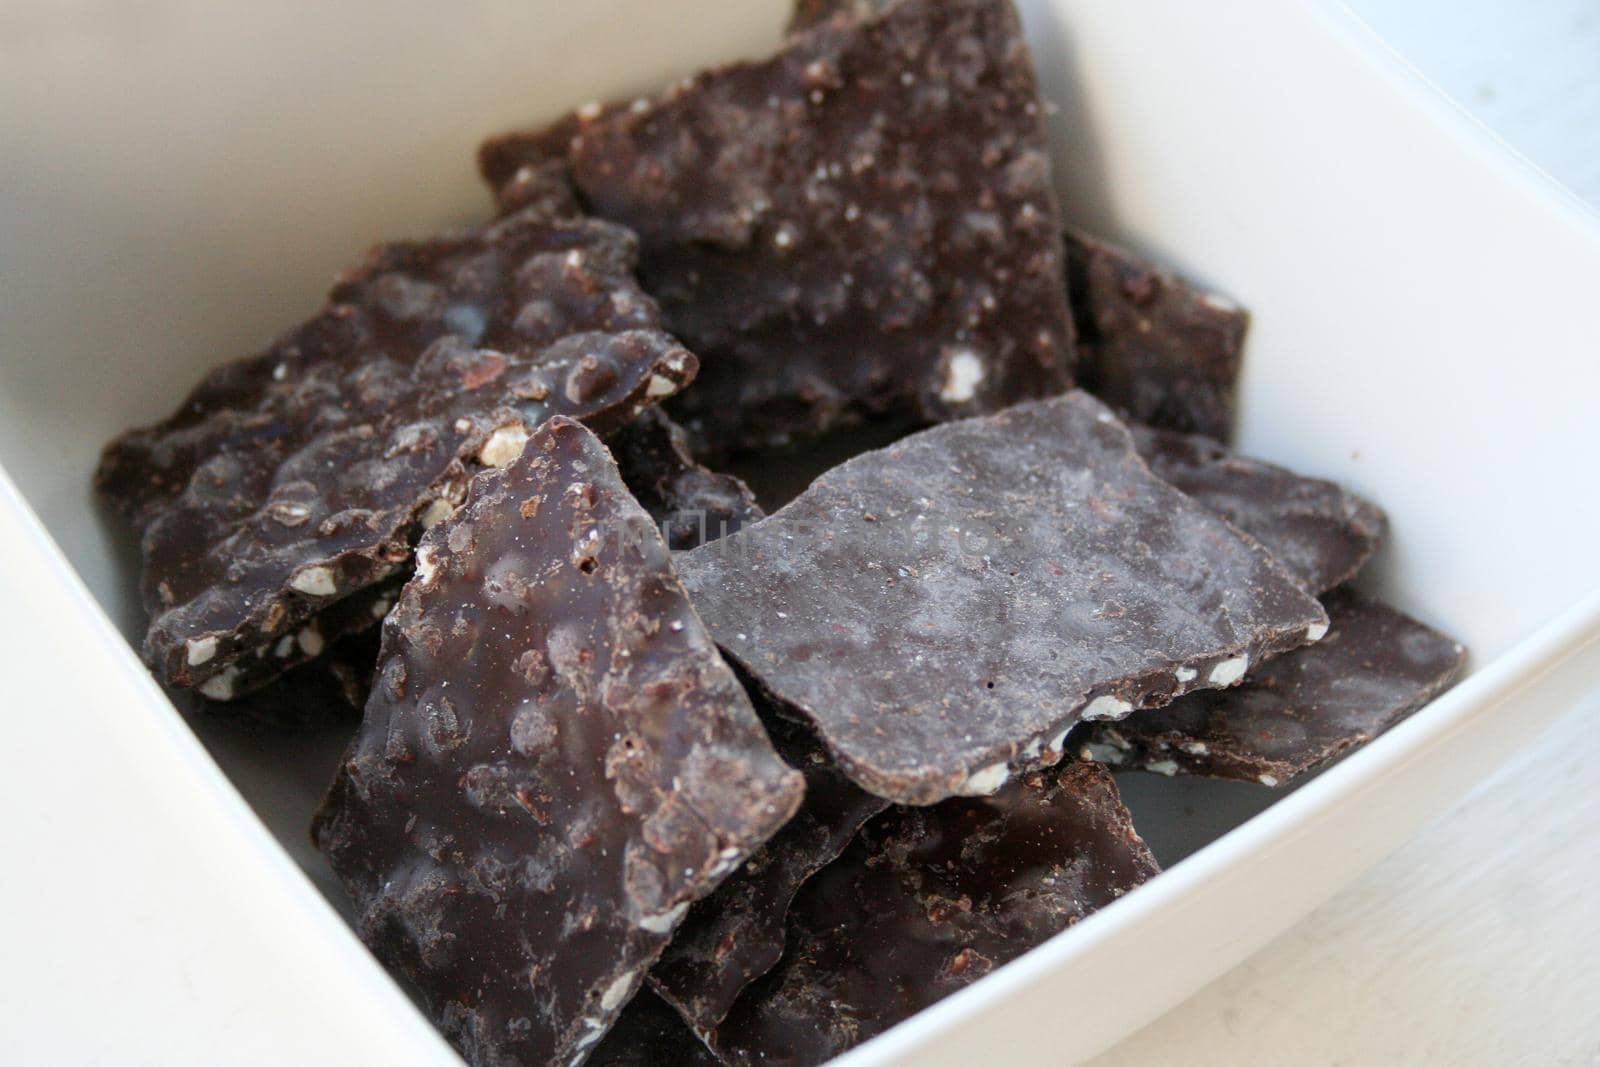 Tasty looking thin slivers of chocolate bark with nuts inside a white bowl 